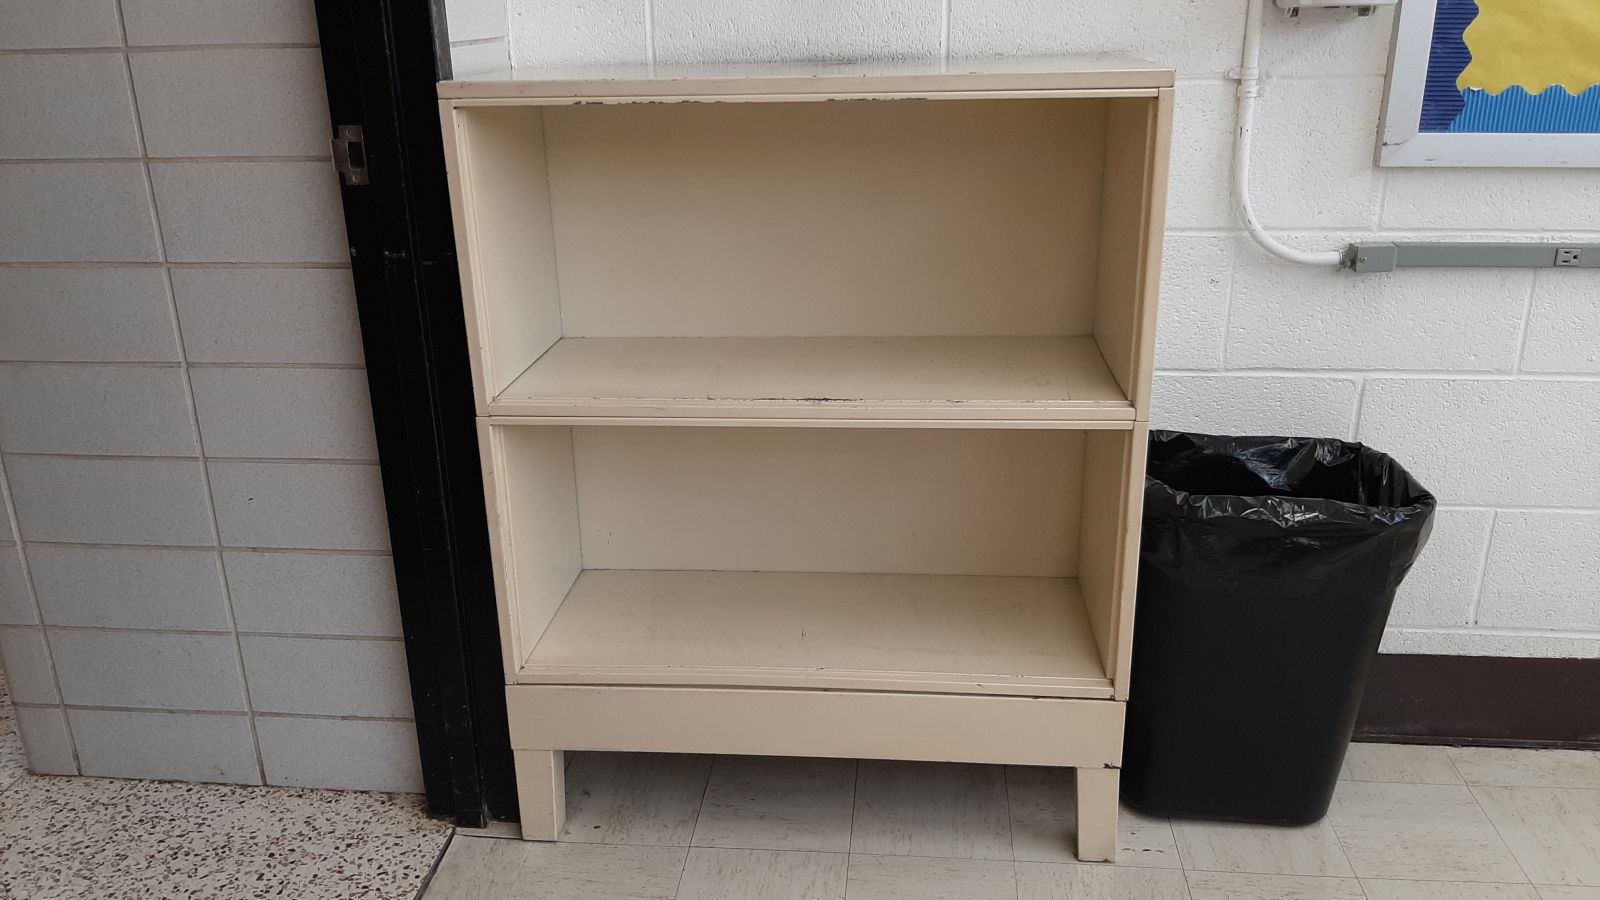 An image of a 2-shelf metal bookcase.